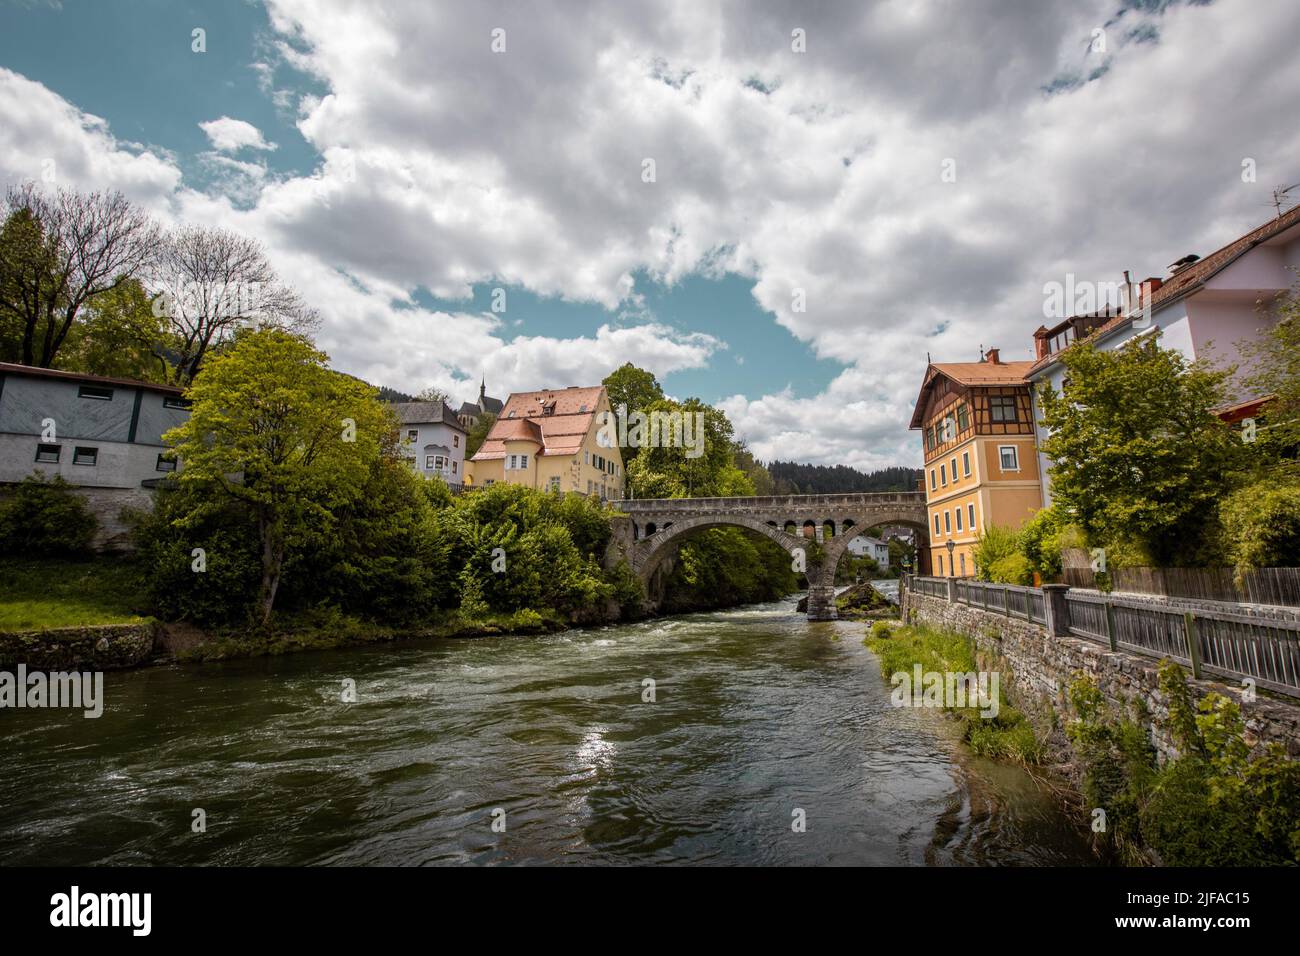 Mura or Mur river flowing through Murau city centre, in central part of austria on a cloudy but sunny day. Stone bridge and classical buildings are se Stock Photo